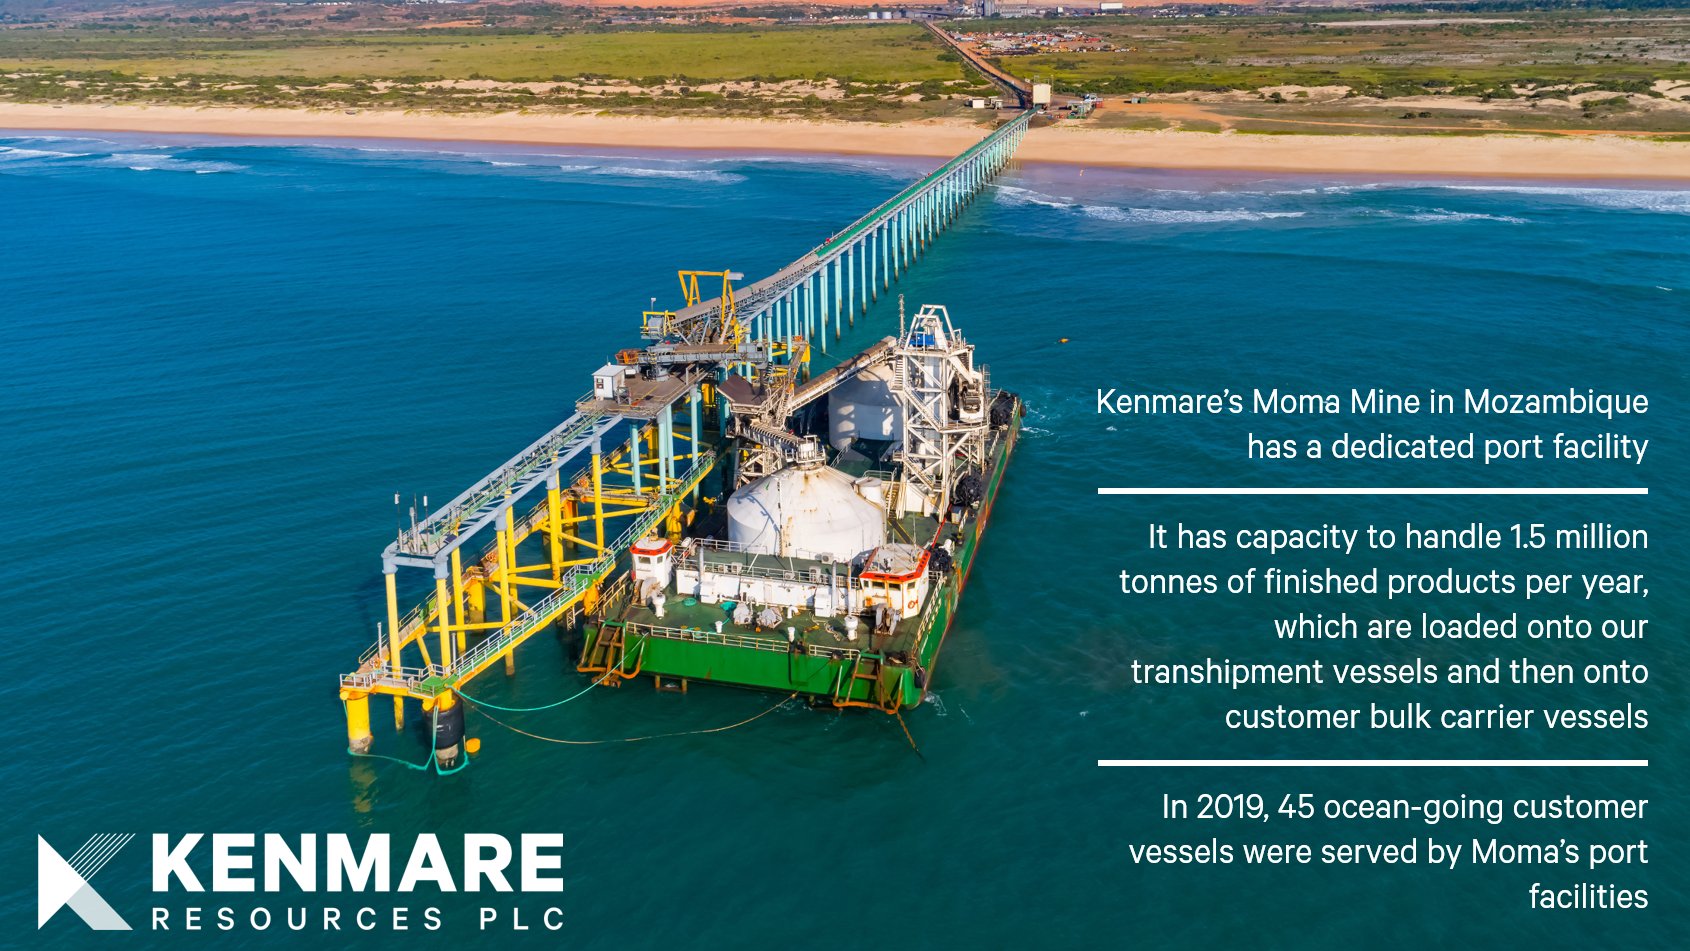 Ret indre ecstasy Kenmare Resources Plc on Twitter: "#Didyouknow that Kenmare's #Moma Mine in  #Mozambique has a dedicated port facility? It has capacity to handle 1.5  million tonnes of finished products per year. In 2019,